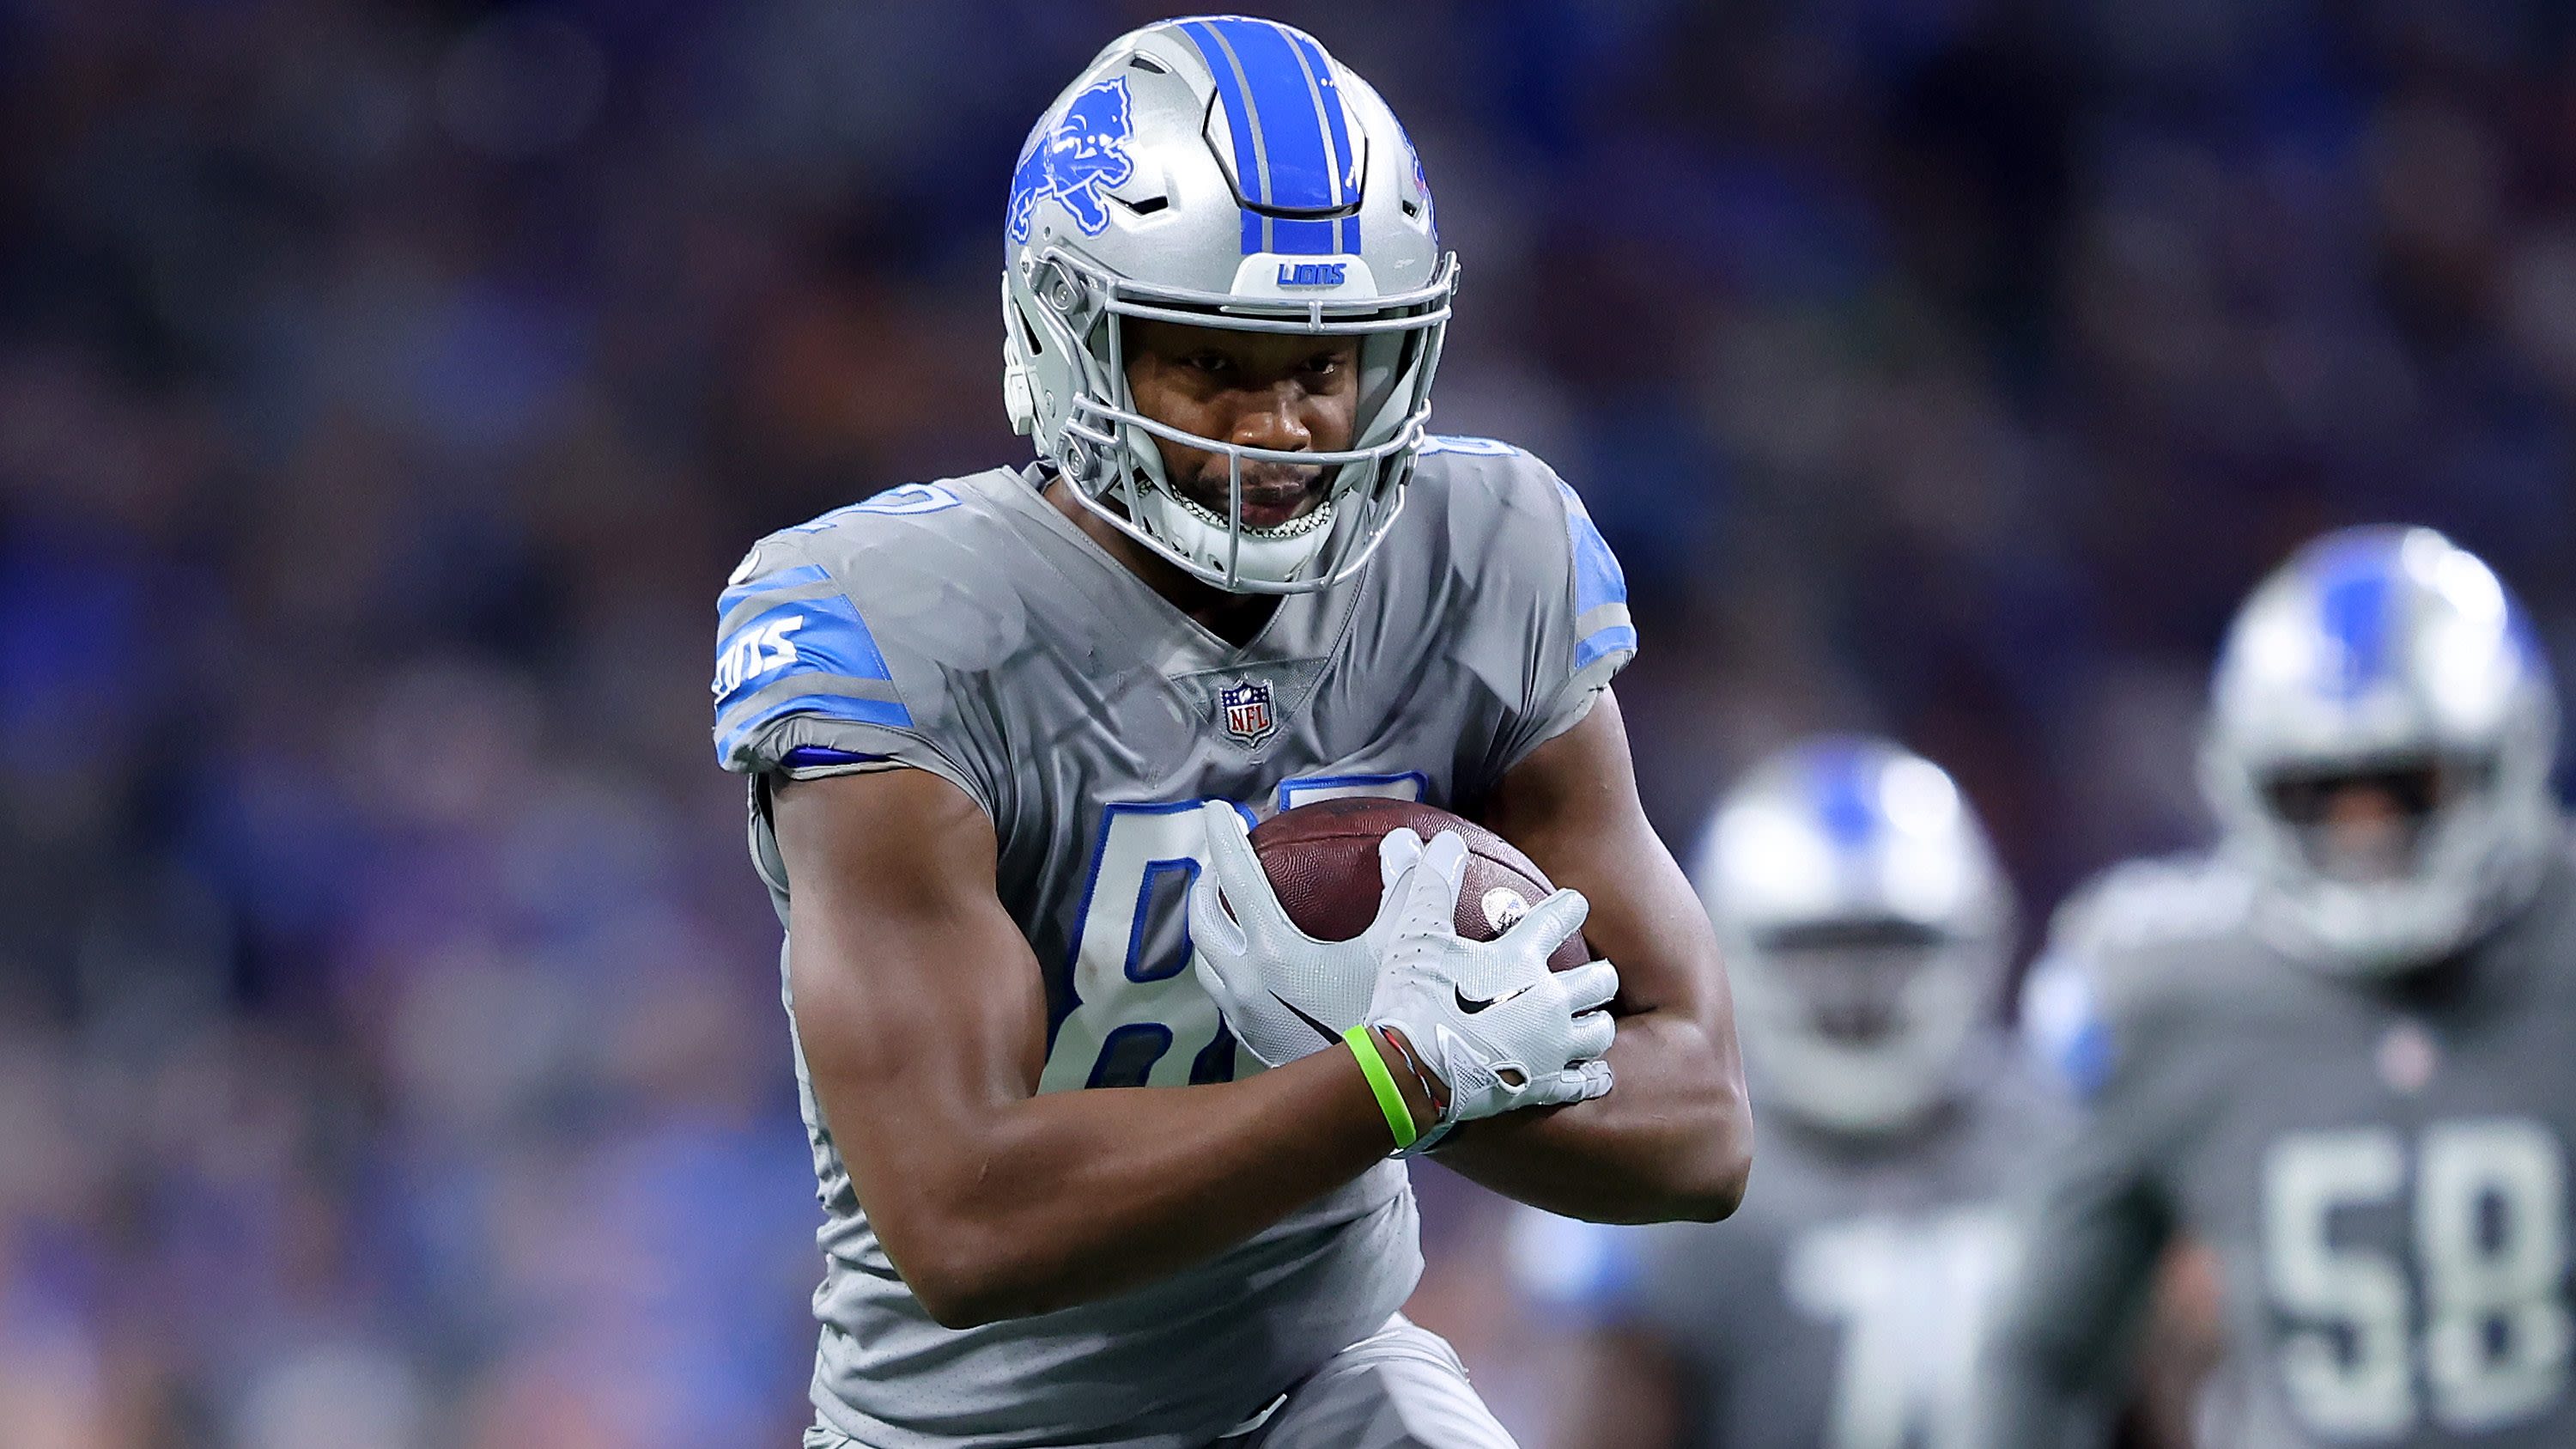 Veteran Lions TE Likely Fighting for His Job This Summer: Analyst